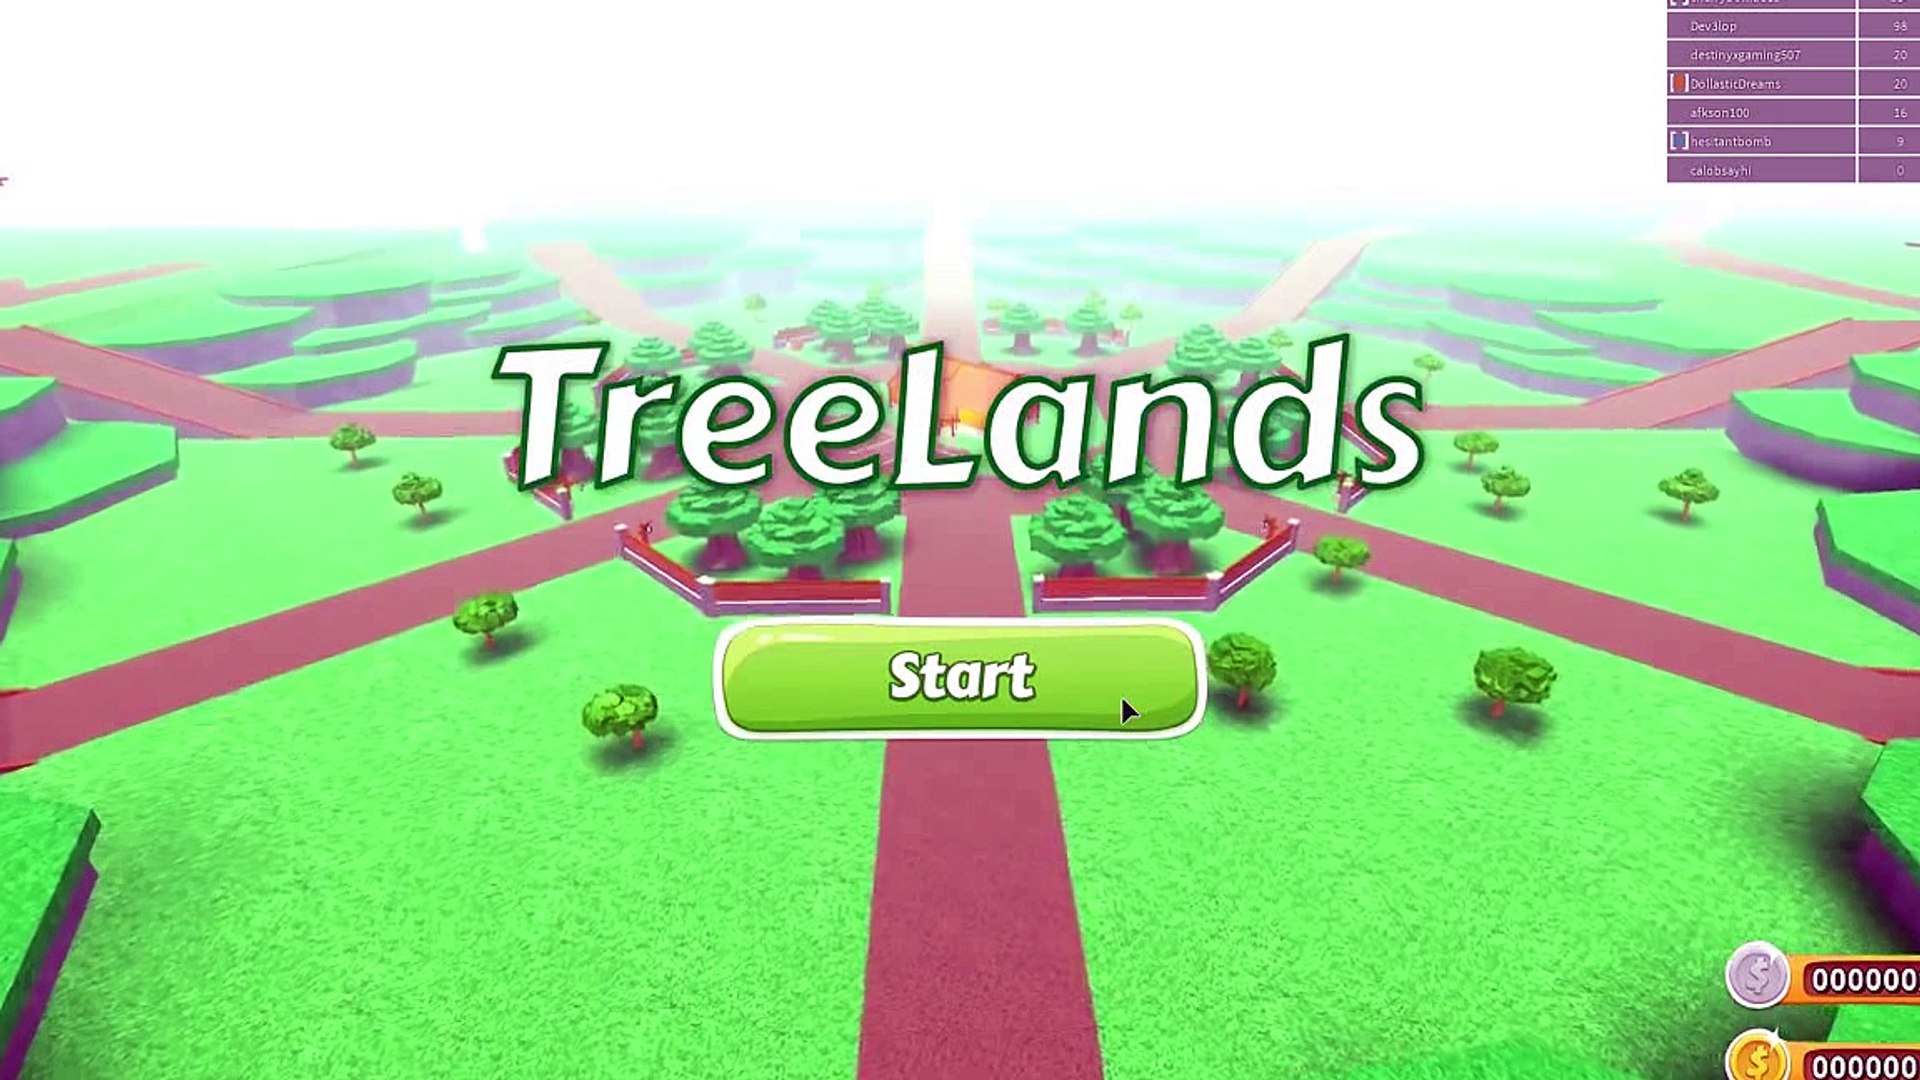 Roblox Treelands Tycoon New Resident In Town Dollastic Plays Roblox Minigame Dailymotion Video - roblox theme park tycoon video dailymotion